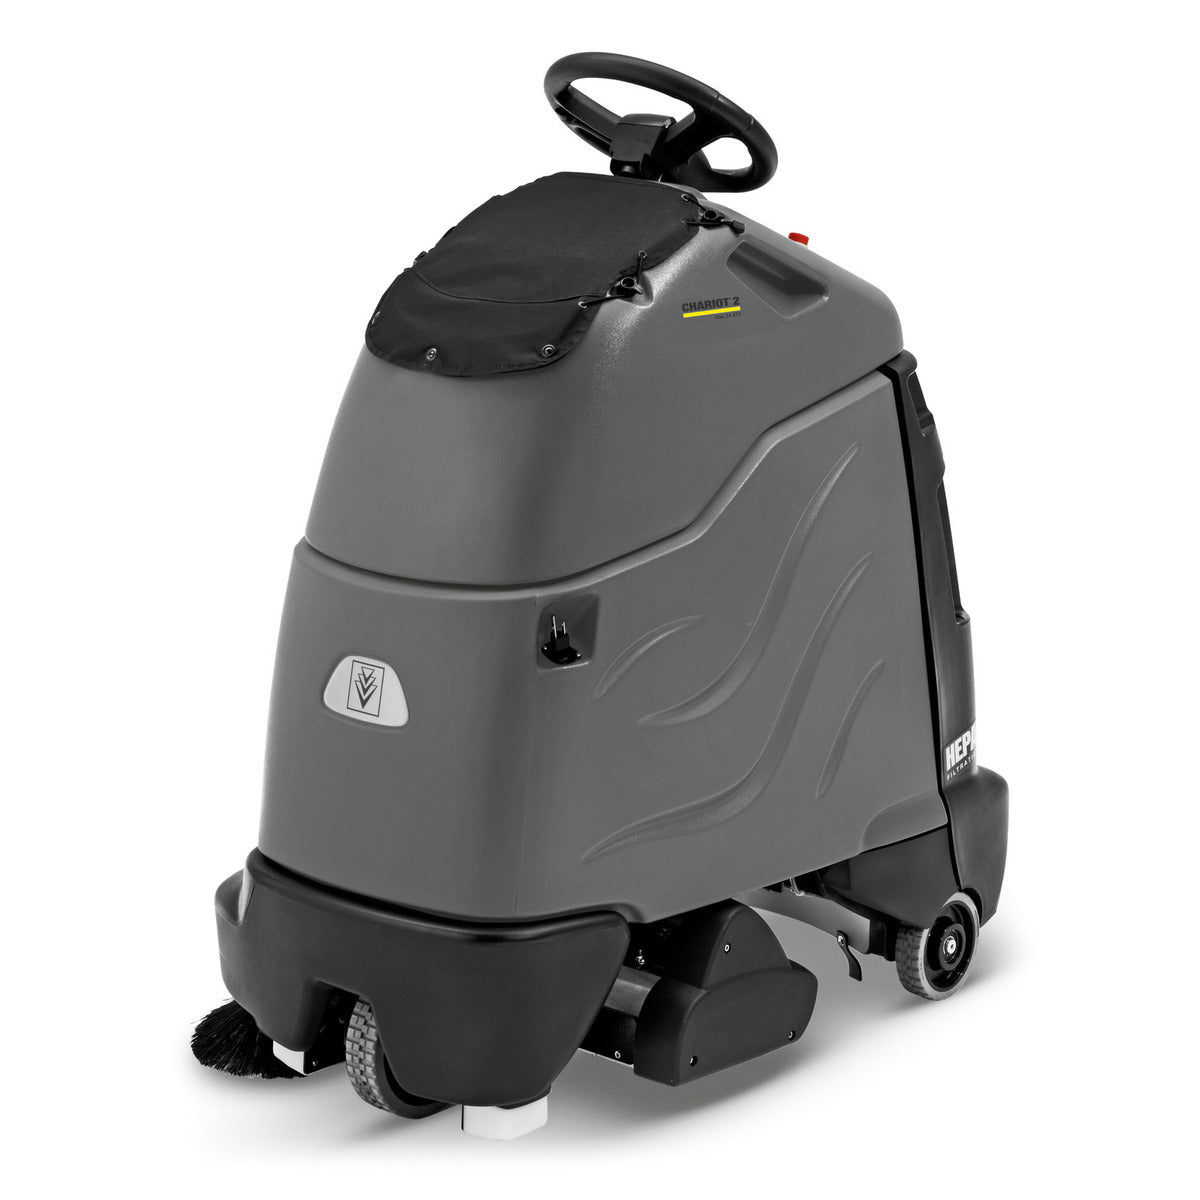 Karcher Windsor Chariot iVac 24" Stand on Vacuum with HEPA Filtration